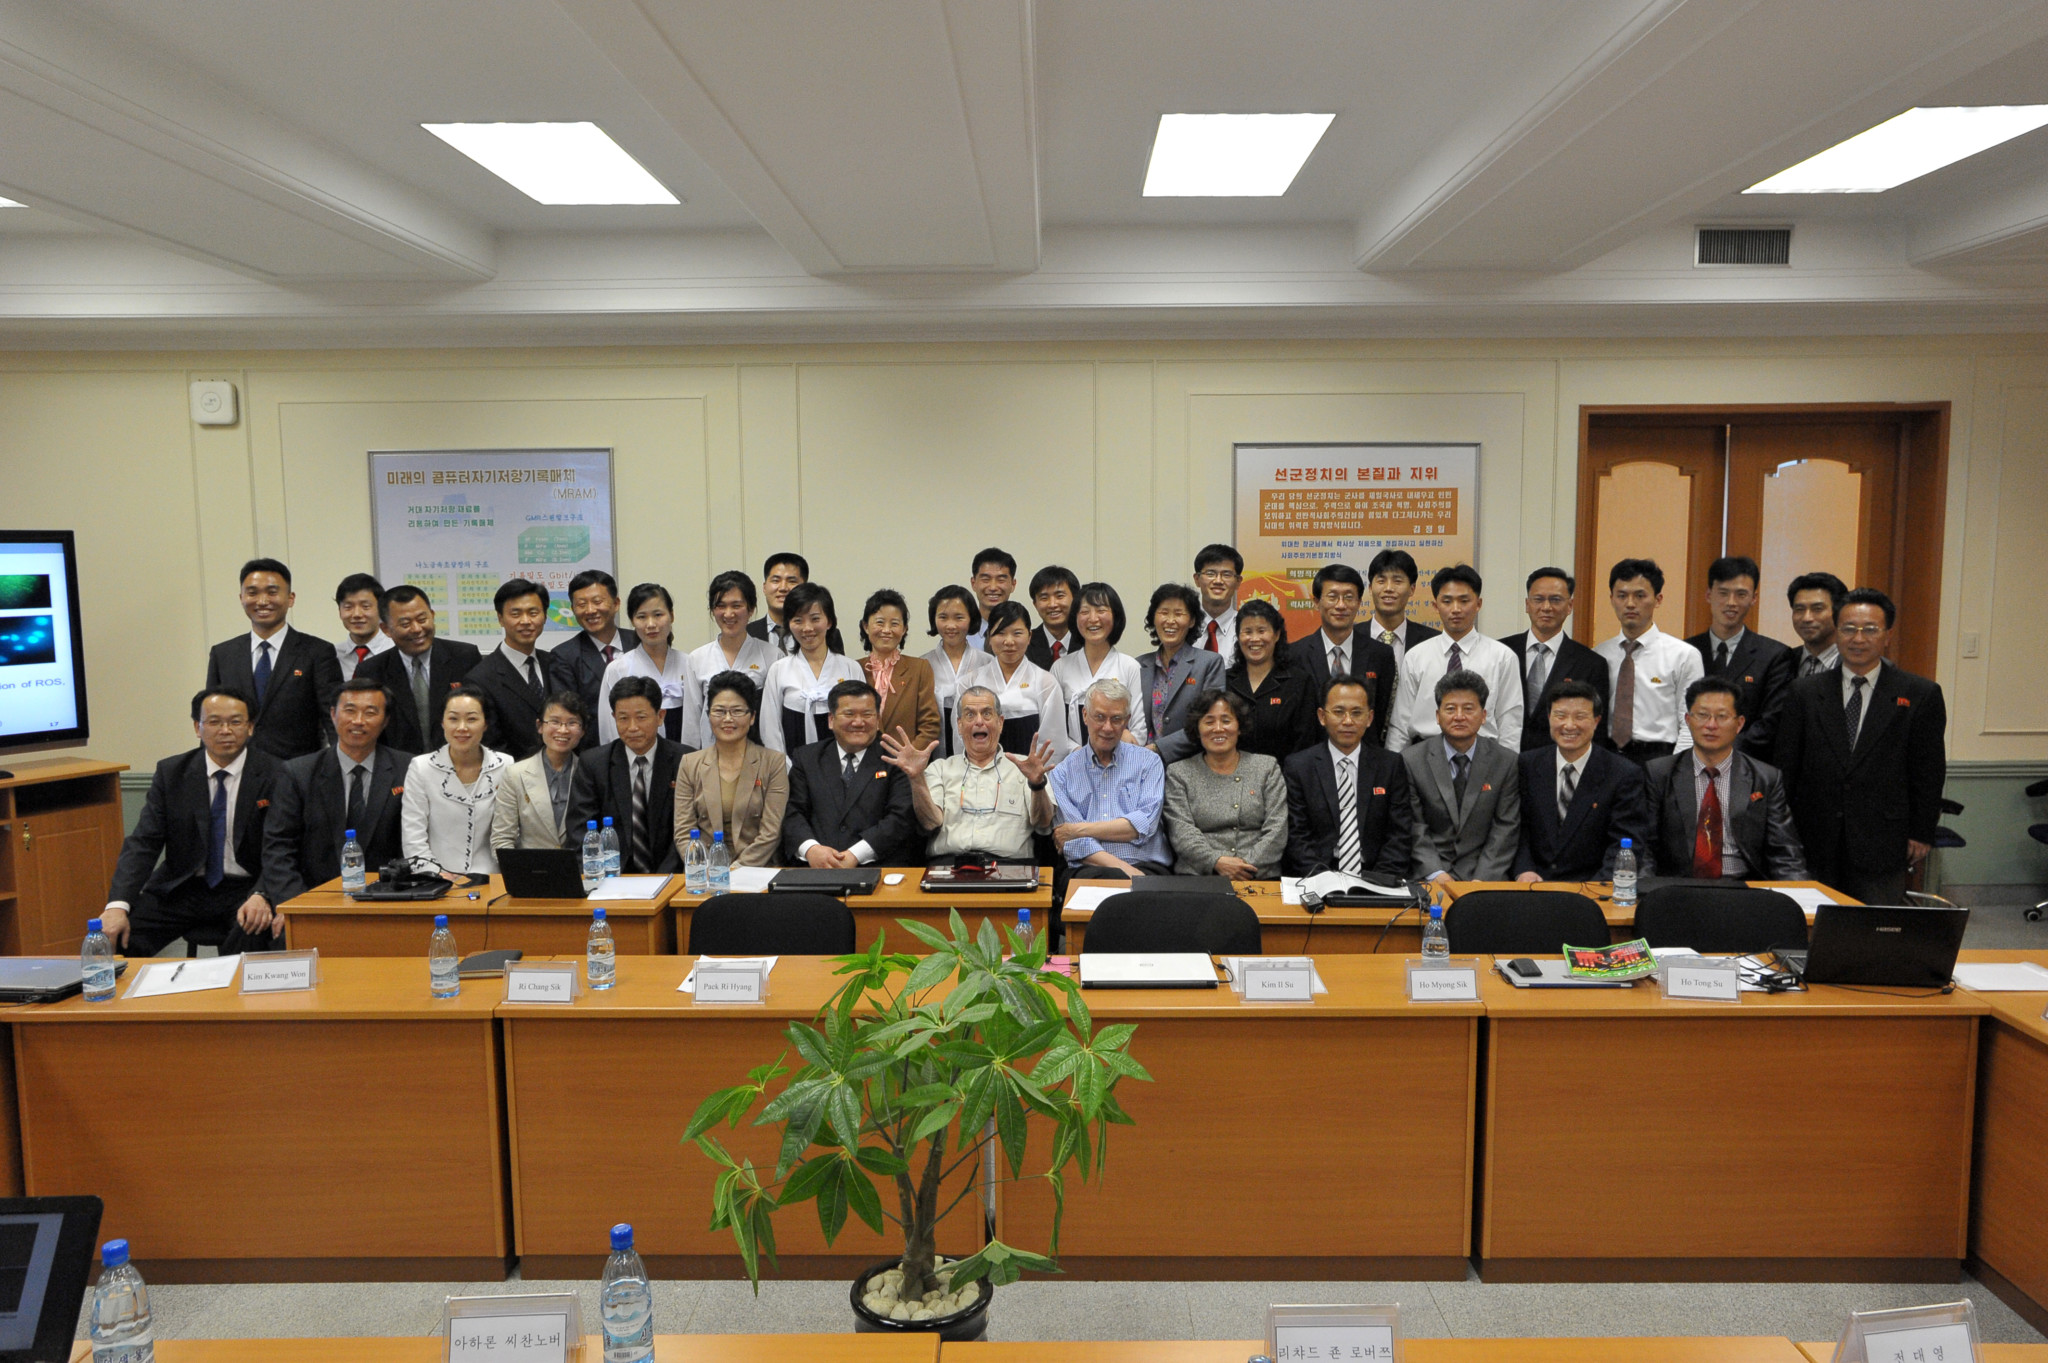 29 Nobel Laureates Prof. Aaron Ciechanover and Dr. Sir RIchard Roberts with members of the faculty and students after the Open Forum at Kim Il Sung University